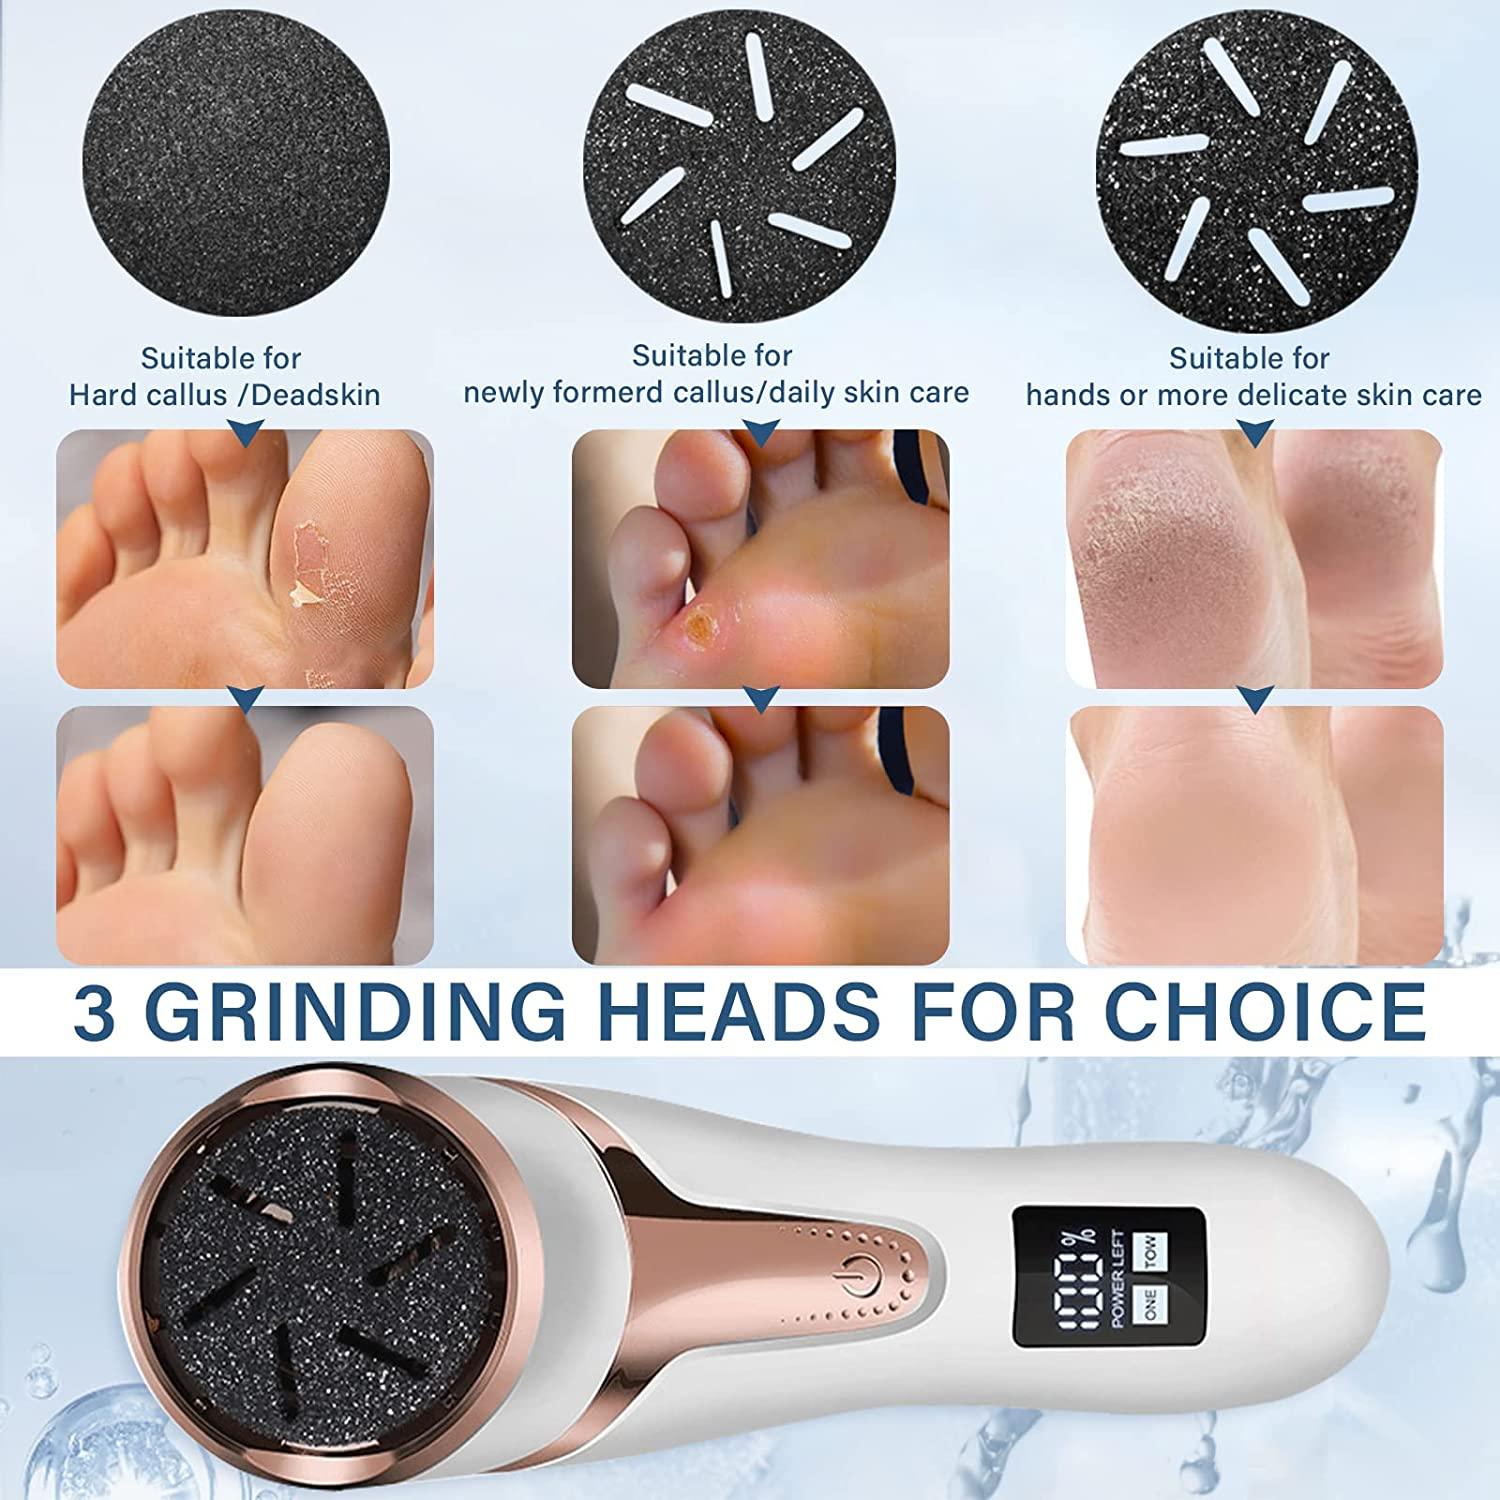 Hoxida Electric Callus Remover for Feet (with Dander Vacuum Cleaner),  Quartz, Rechargeable Foot Pedicure Tools Foot File, Professional Foot Care  Kit Deadskin Re… in 2023